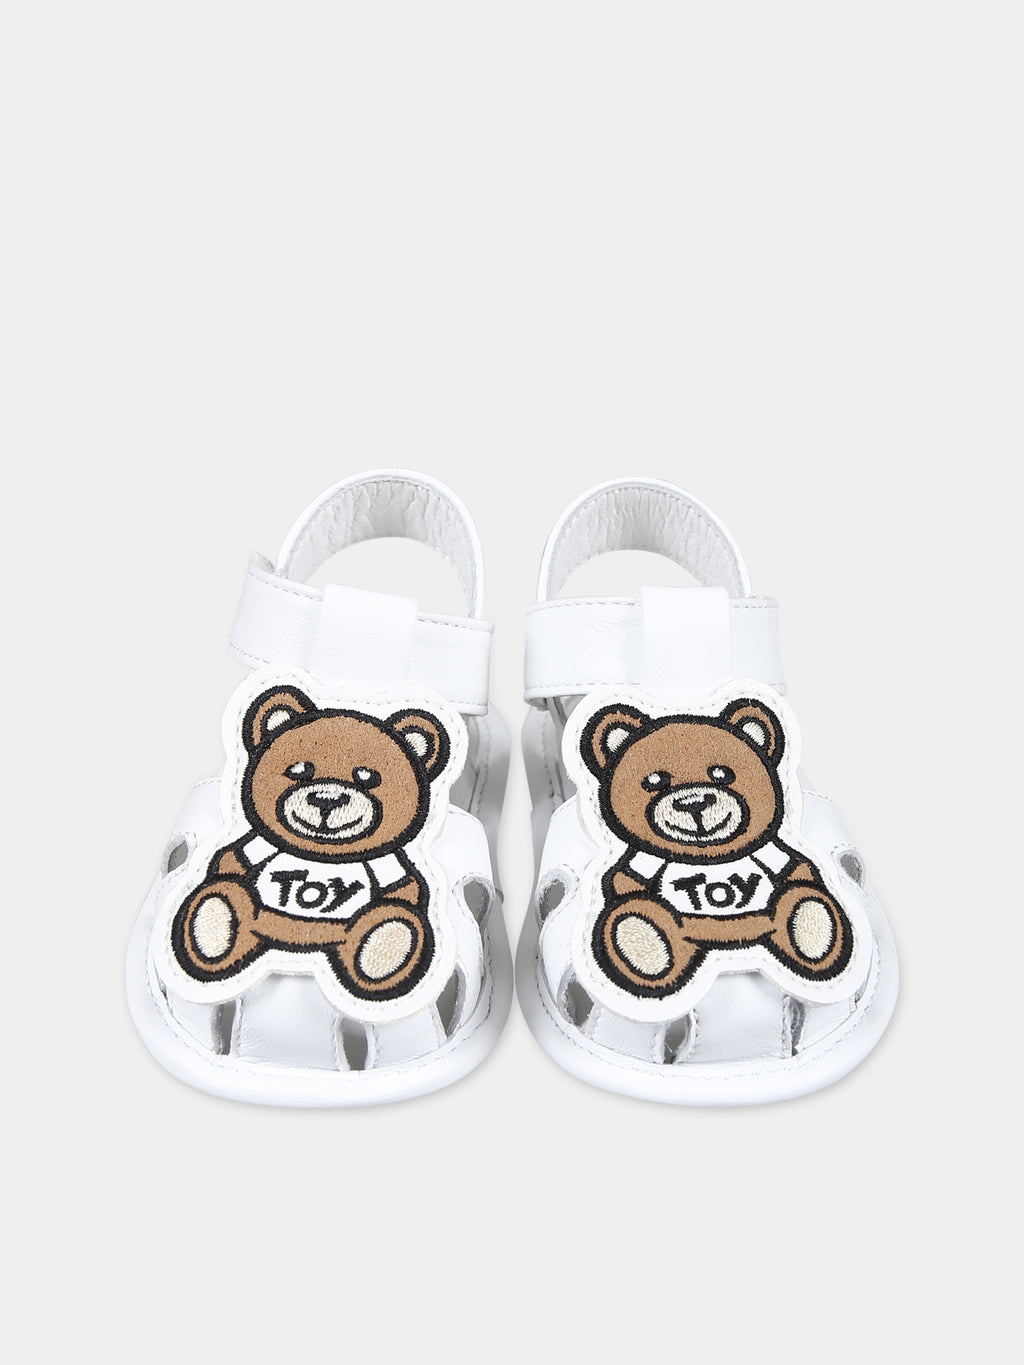 White sandals for babykids with Teddy Bear